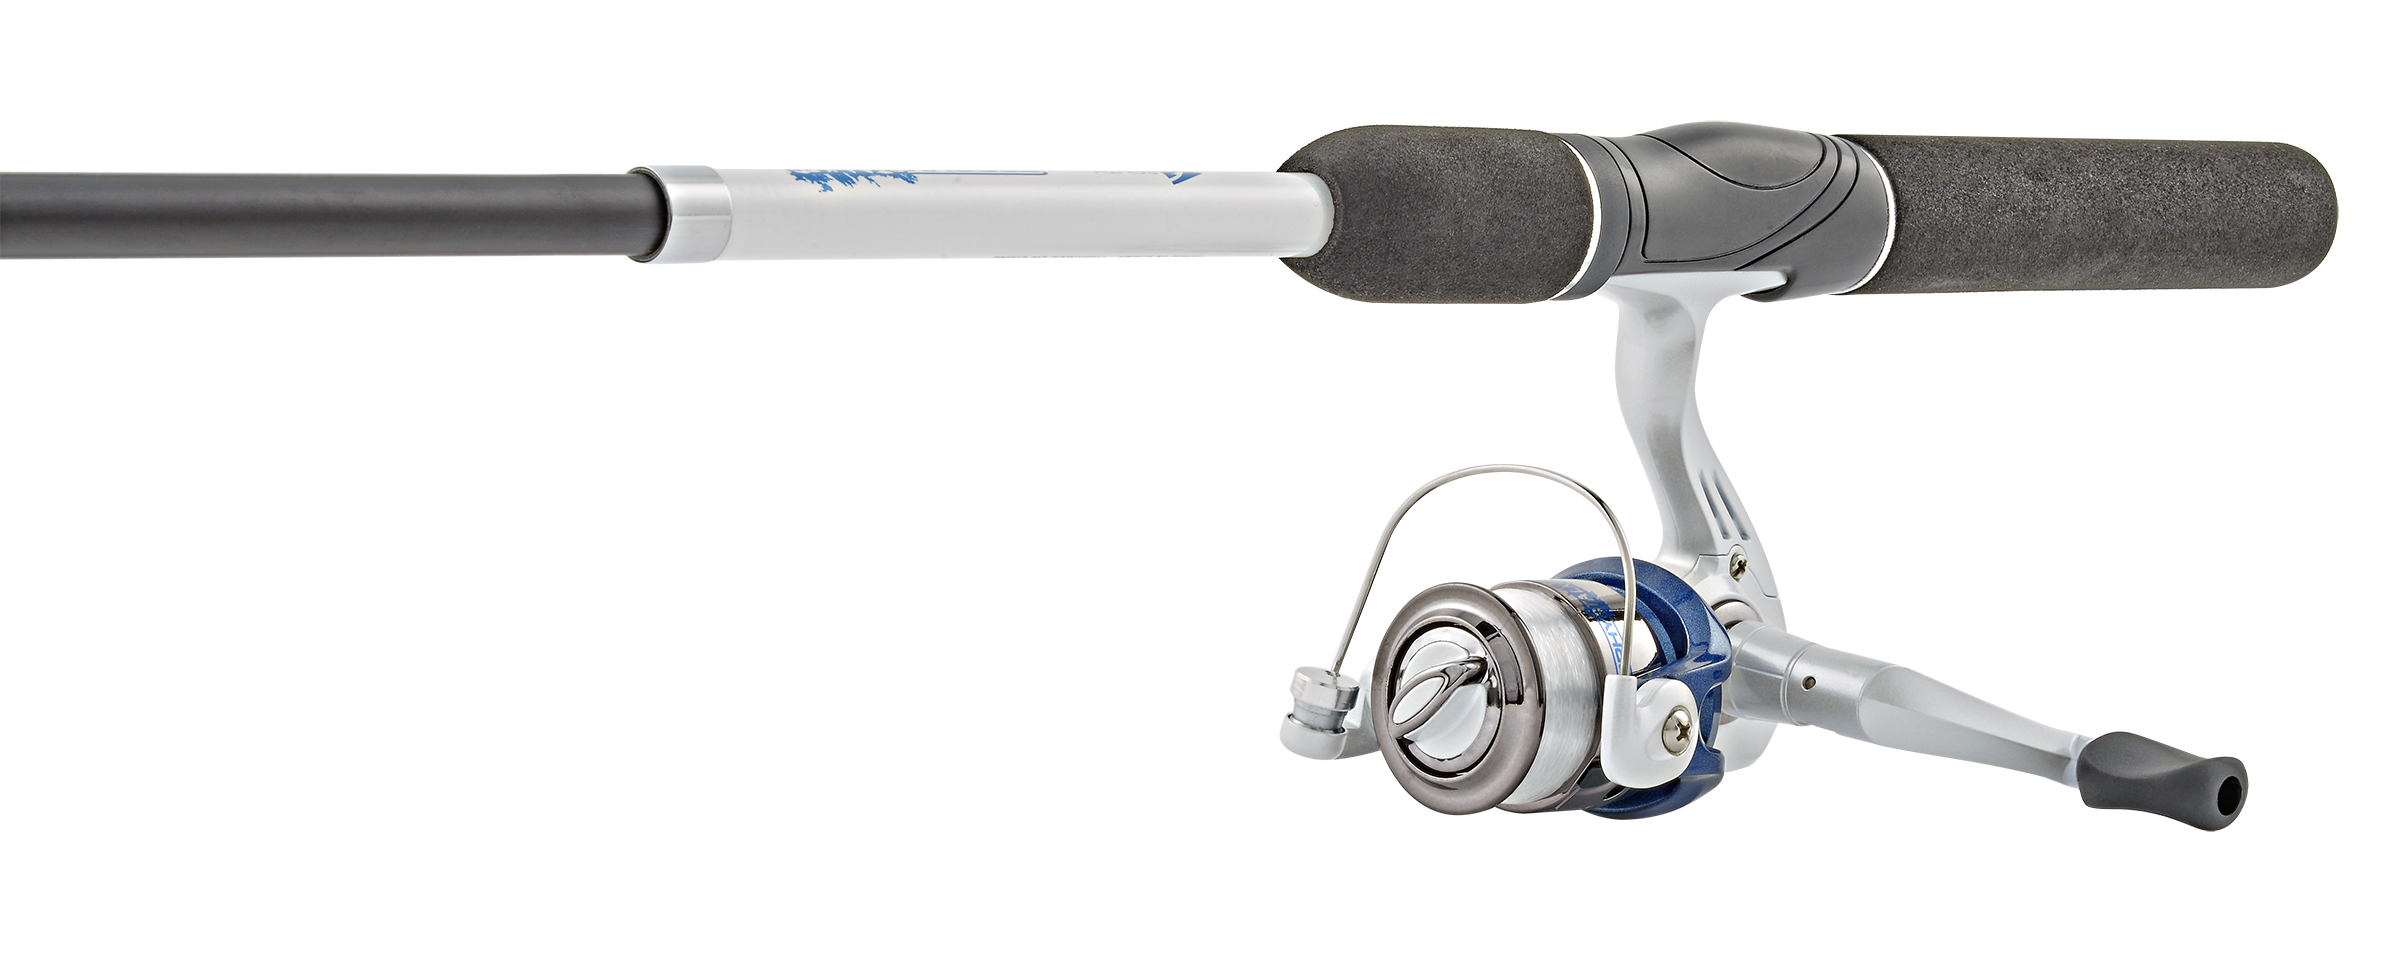 South Bend Trophy Stalker Telescopic Spinning Rod and Reel Combo